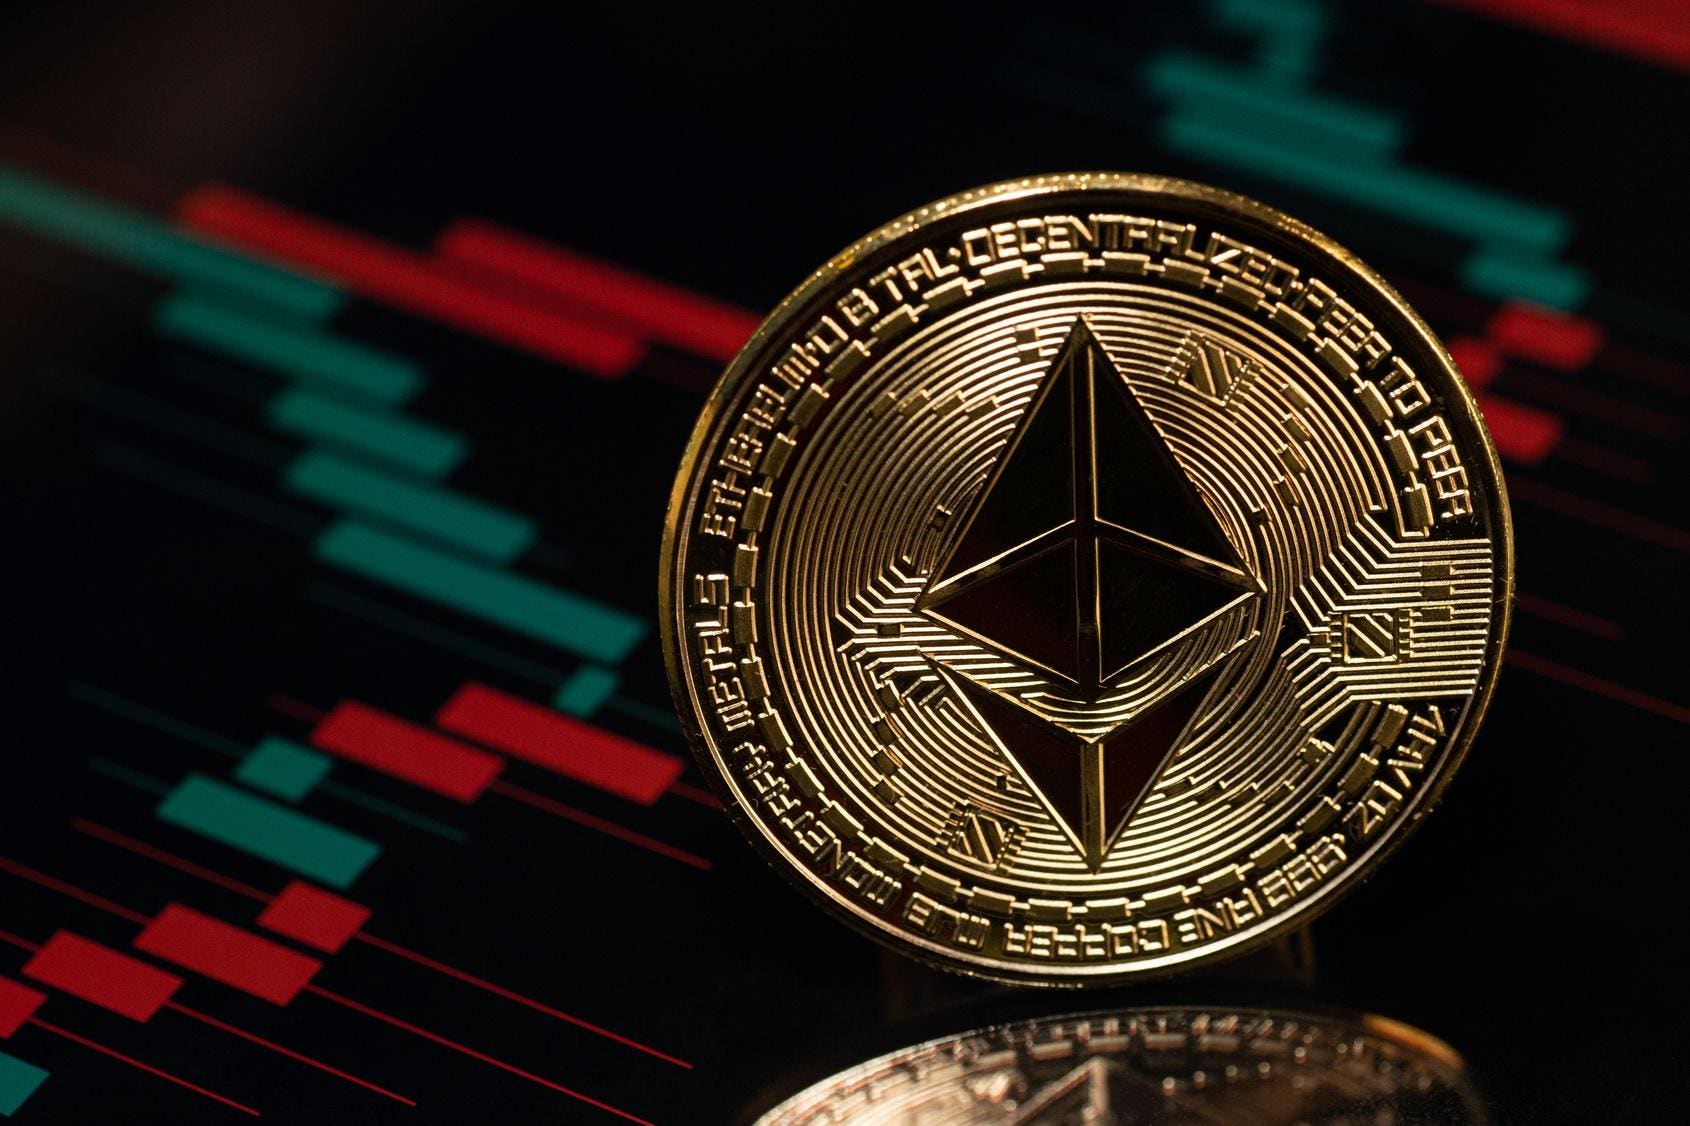 What You Need To Know Ahead of Ethereum's Dencun Update Wednesday